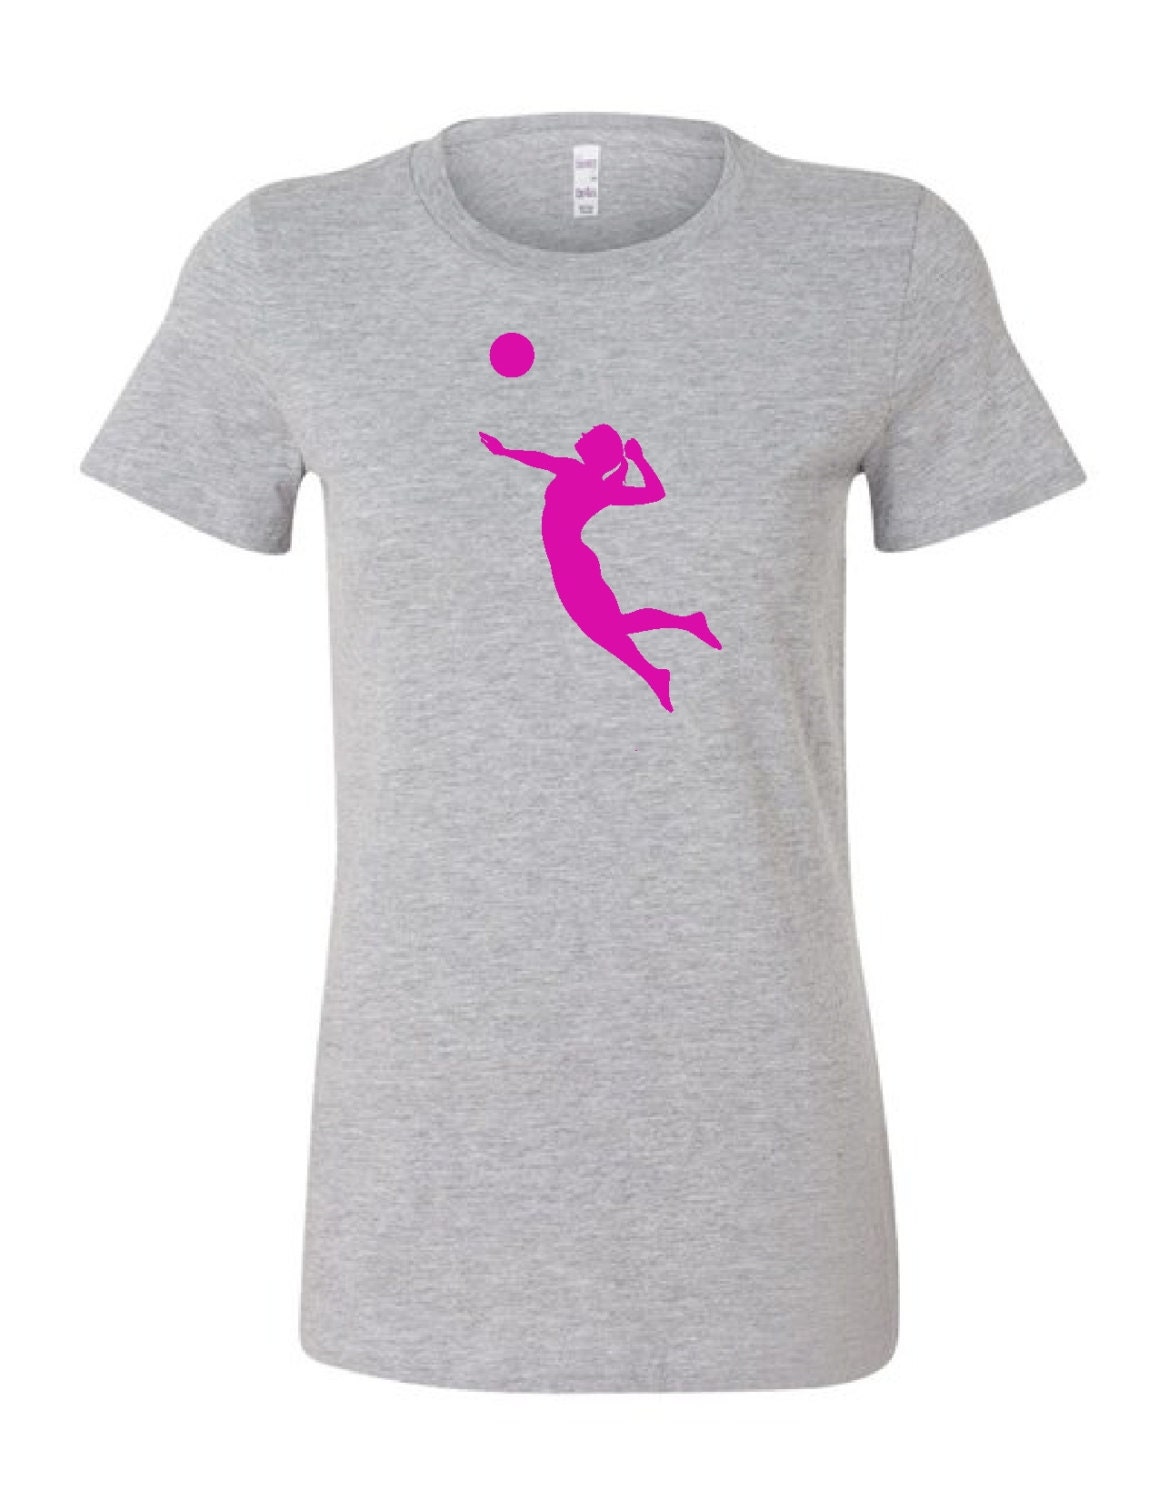 Women's volleyball t-shirt MORE COLORS AVAILABLE